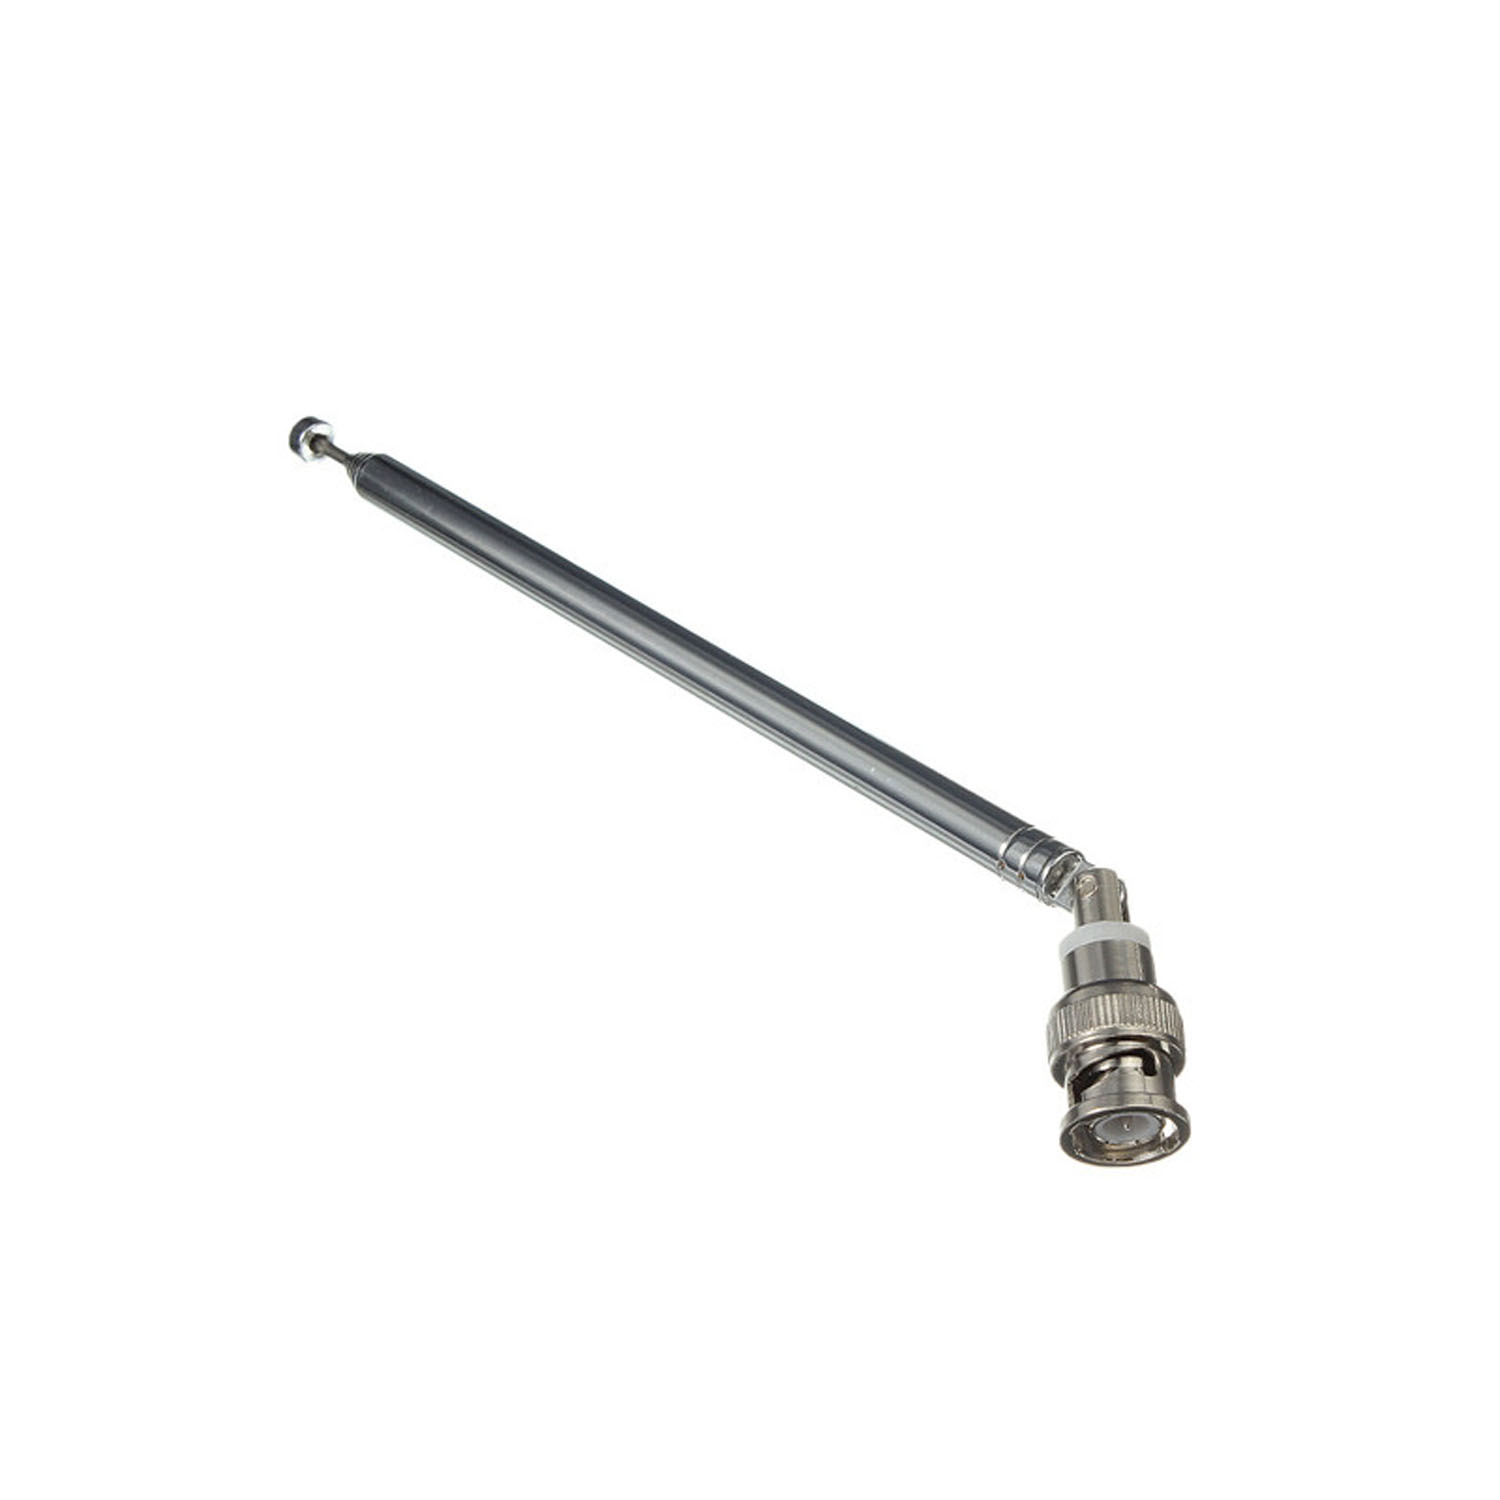 UNIDEN - BATG0540001 FOLD OVER TELESCOPIC ANTENNA WITH BNC FITTING FOR UNIDEN SCANNERS